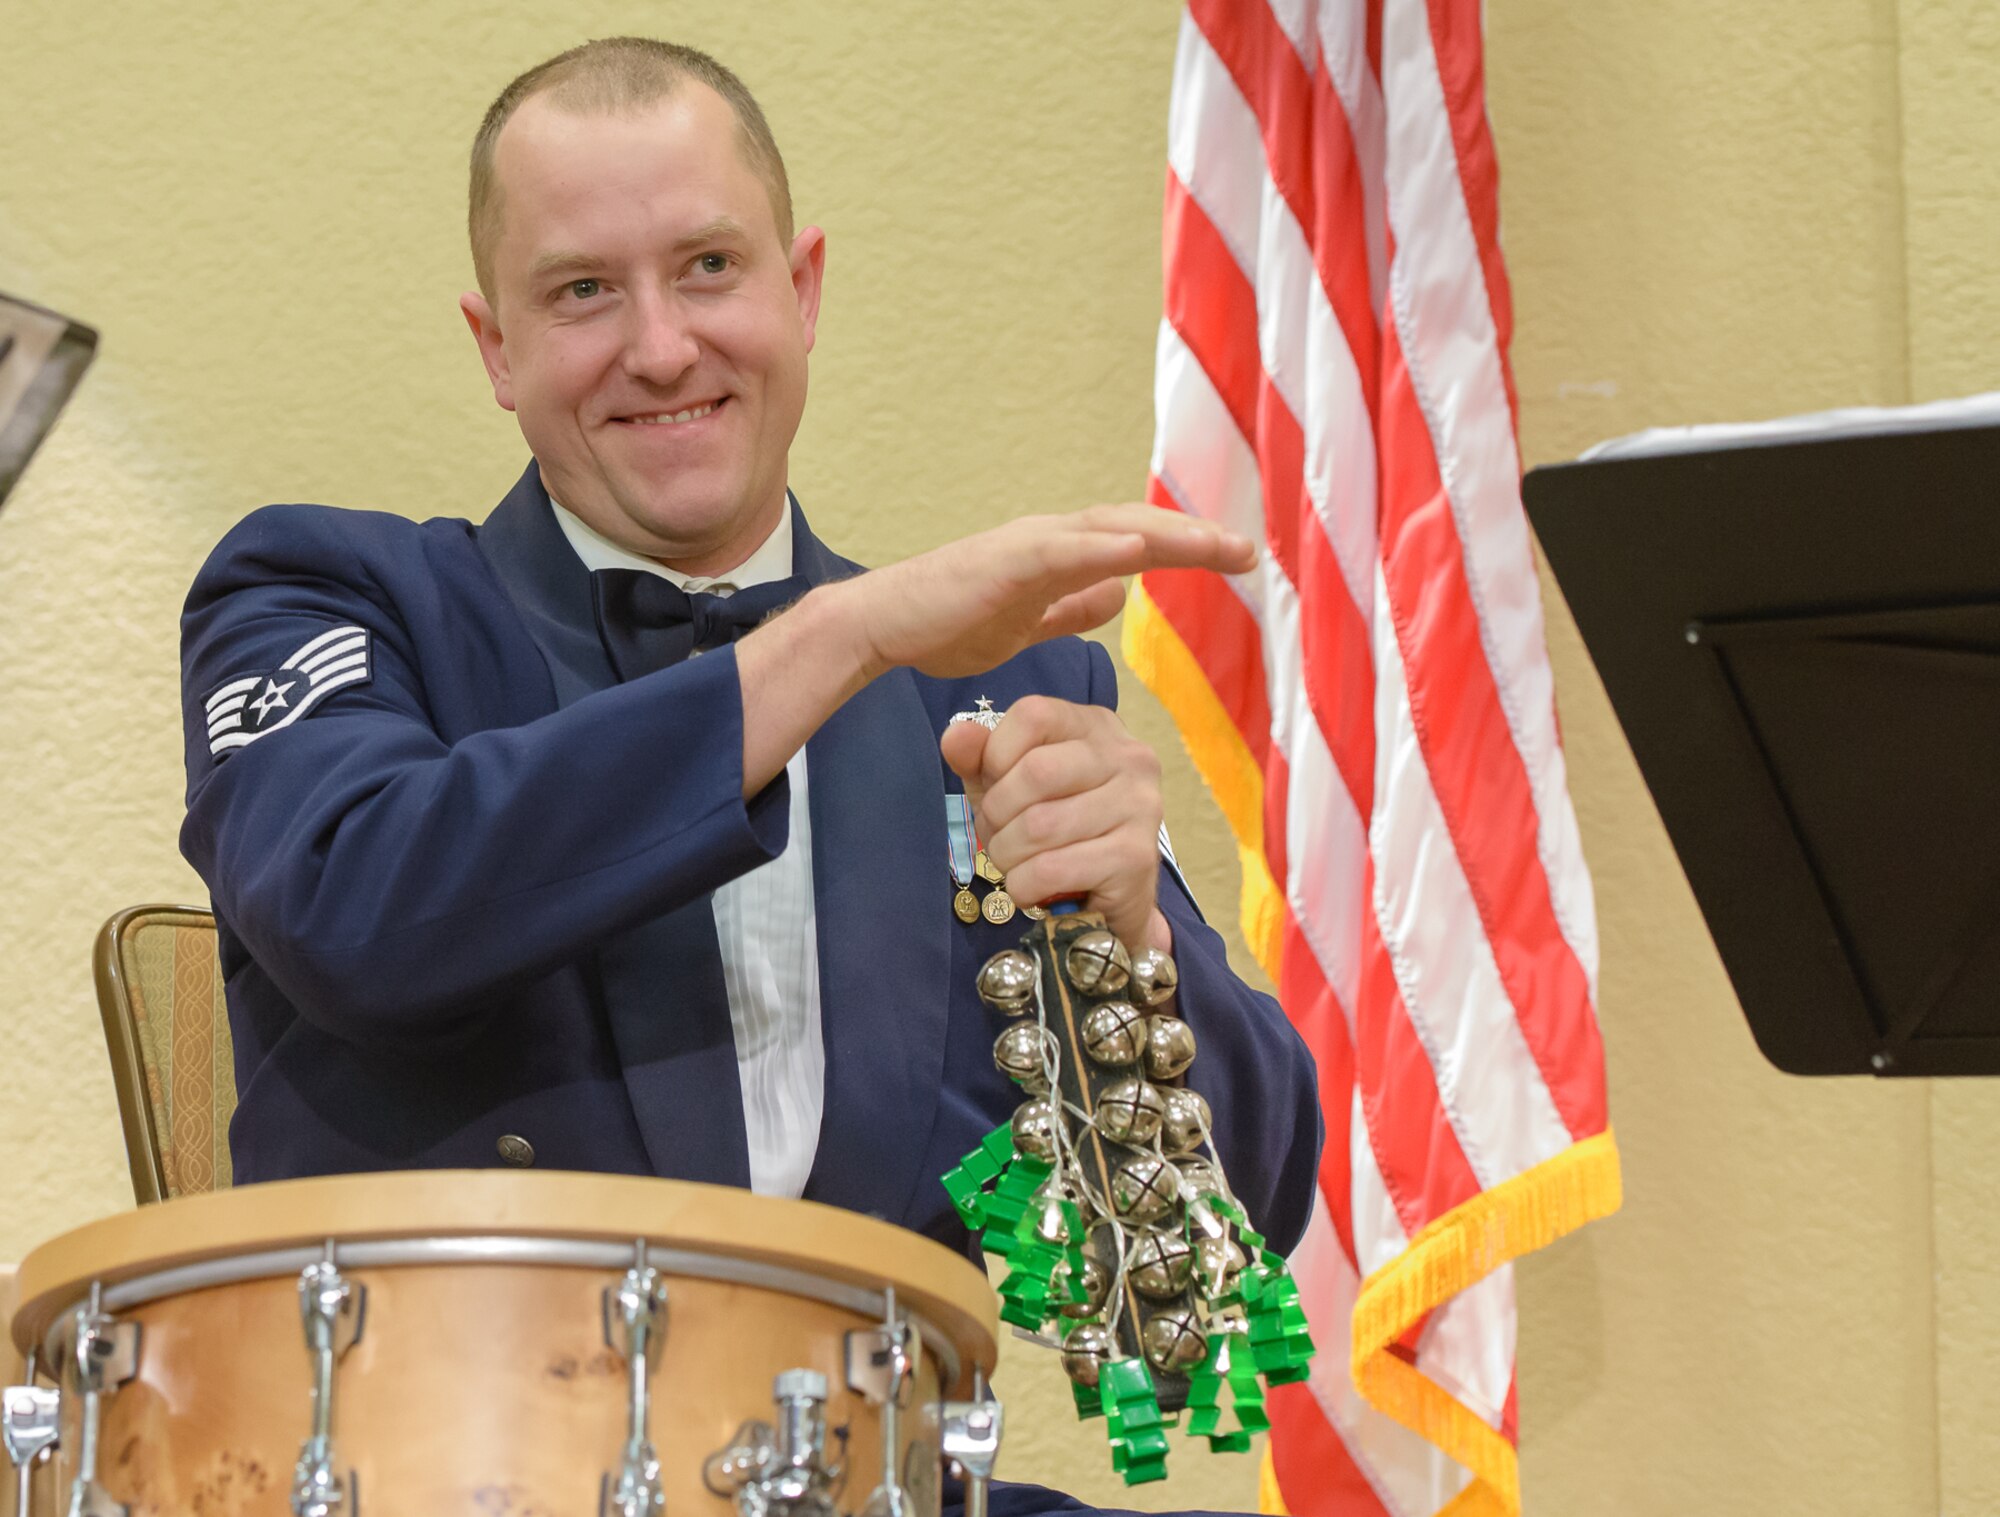 Staff Sgt. BJ Richard, The U.S. Air Force Band of the West, Nightwatch percussionist, performs with The U.S. Air Force Band of the West, Nightwatch,  during the Airman Leadership School graduation at the Bay Breeze Event Center Dec. 13, 2017, on Keesler Air Force Base, Mississippi. During the two-day visit to Keesler the band performed for Airmen and local residents throughout various locations at Keesler and the nearby area. Their mission is to honor military heritage through music, connect with the American public and inspire patriotism and excellence. (U.S. Air Force photo by André Askew)